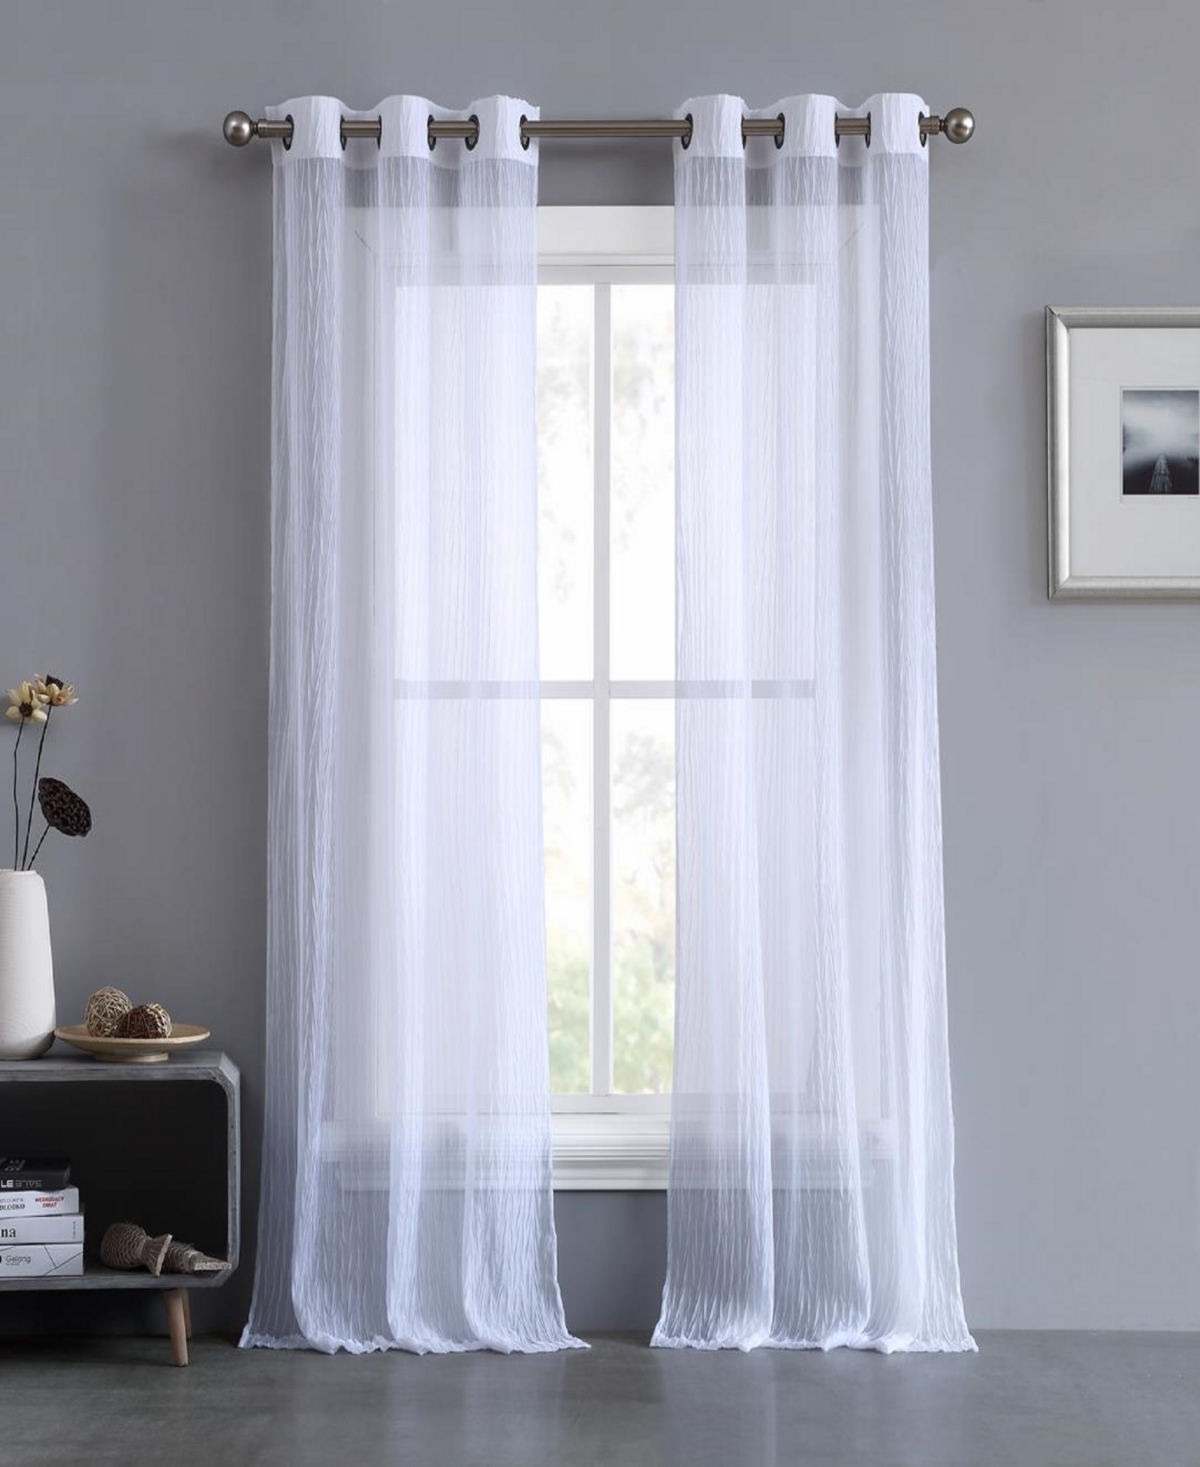 Marnie Crushed Solid Sheer Voile Grommet Window Curtain Panel Set, 38" x 84" - White